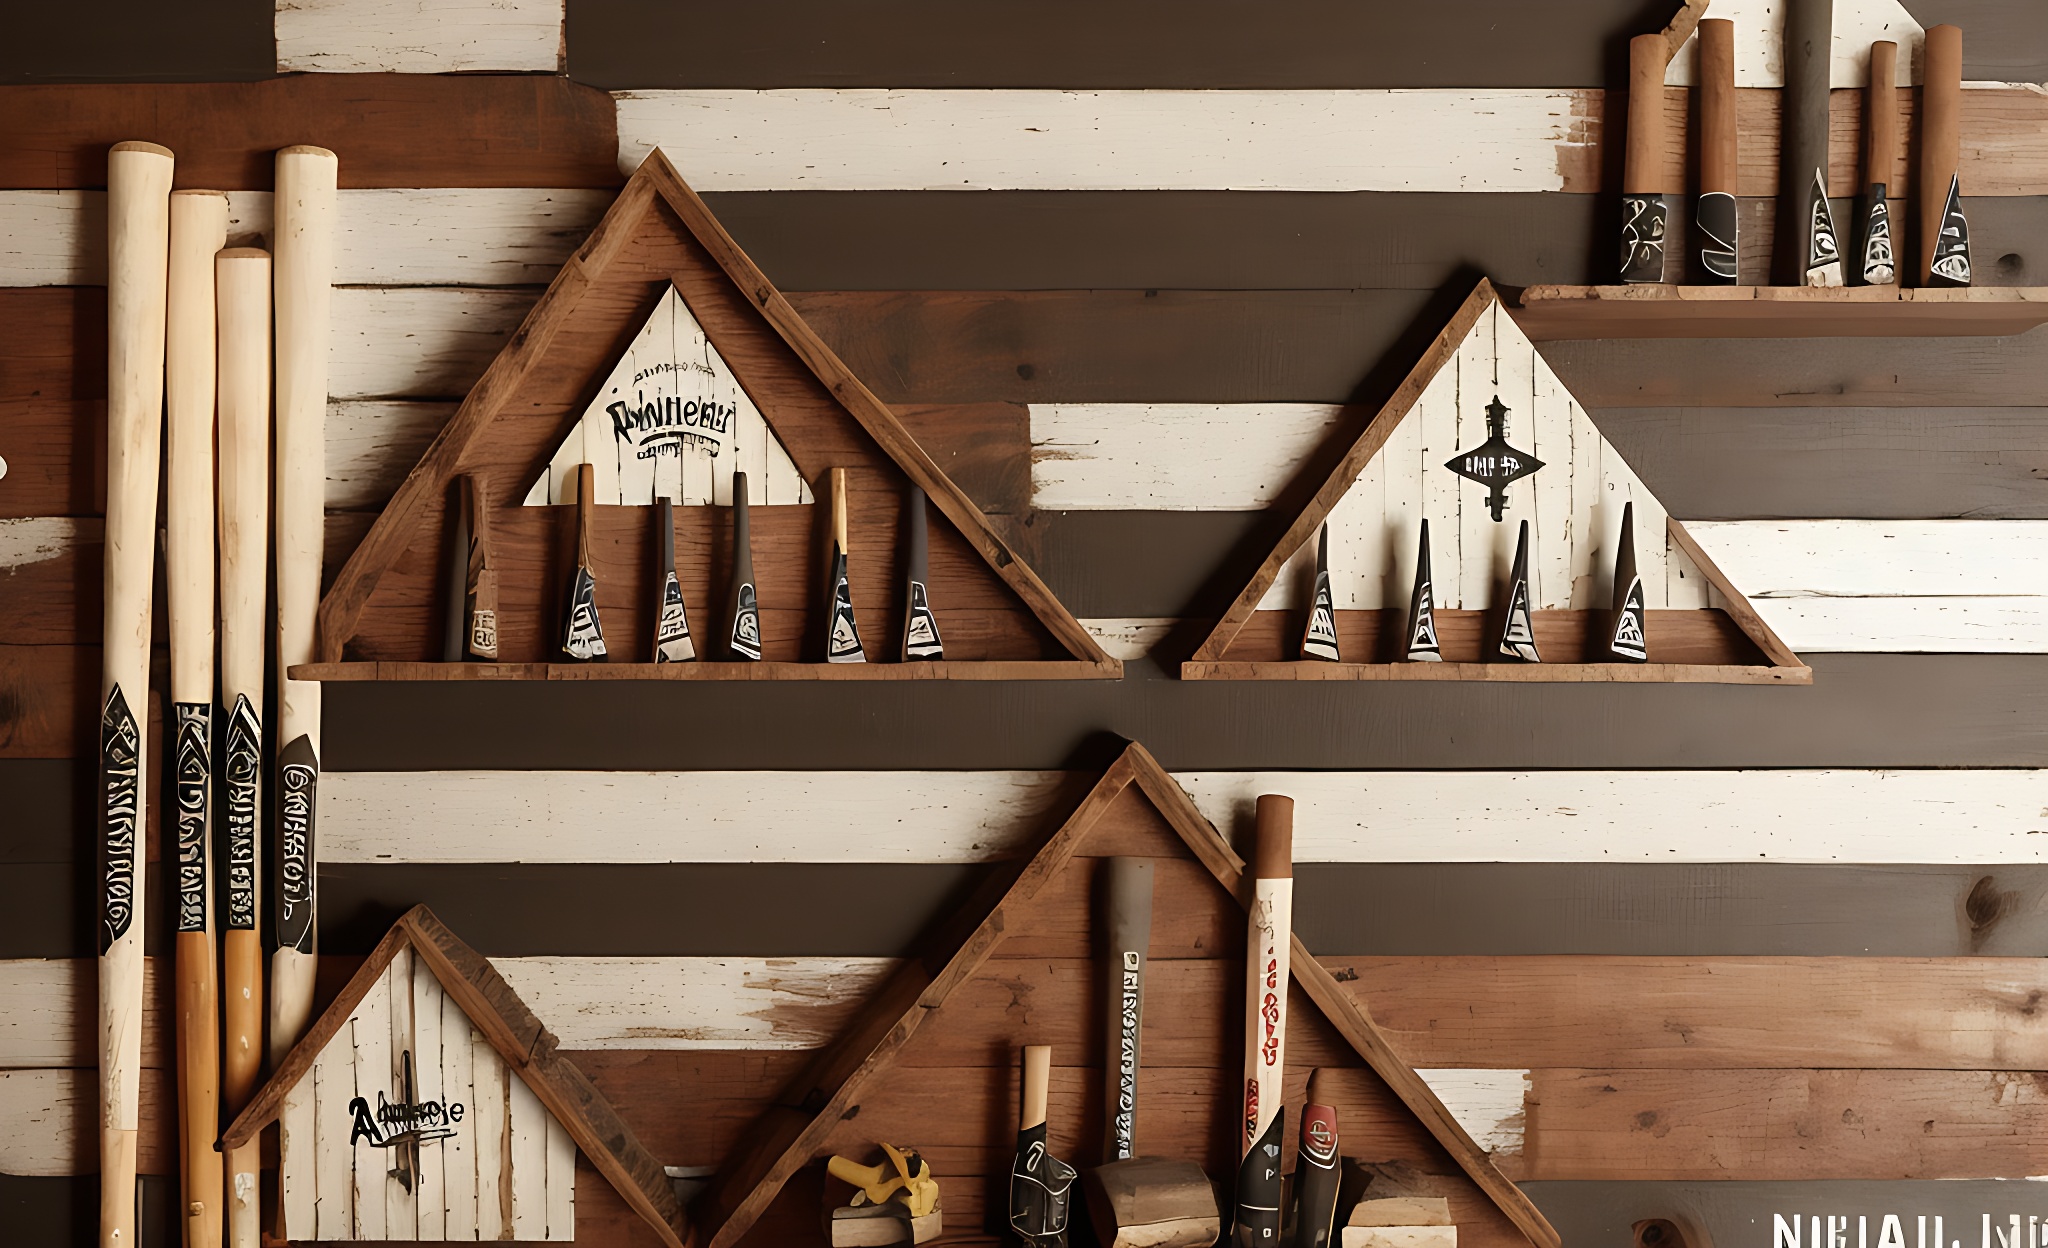 How To Hang Baseball Bats On Wall? (A Step-by-Step Guide)